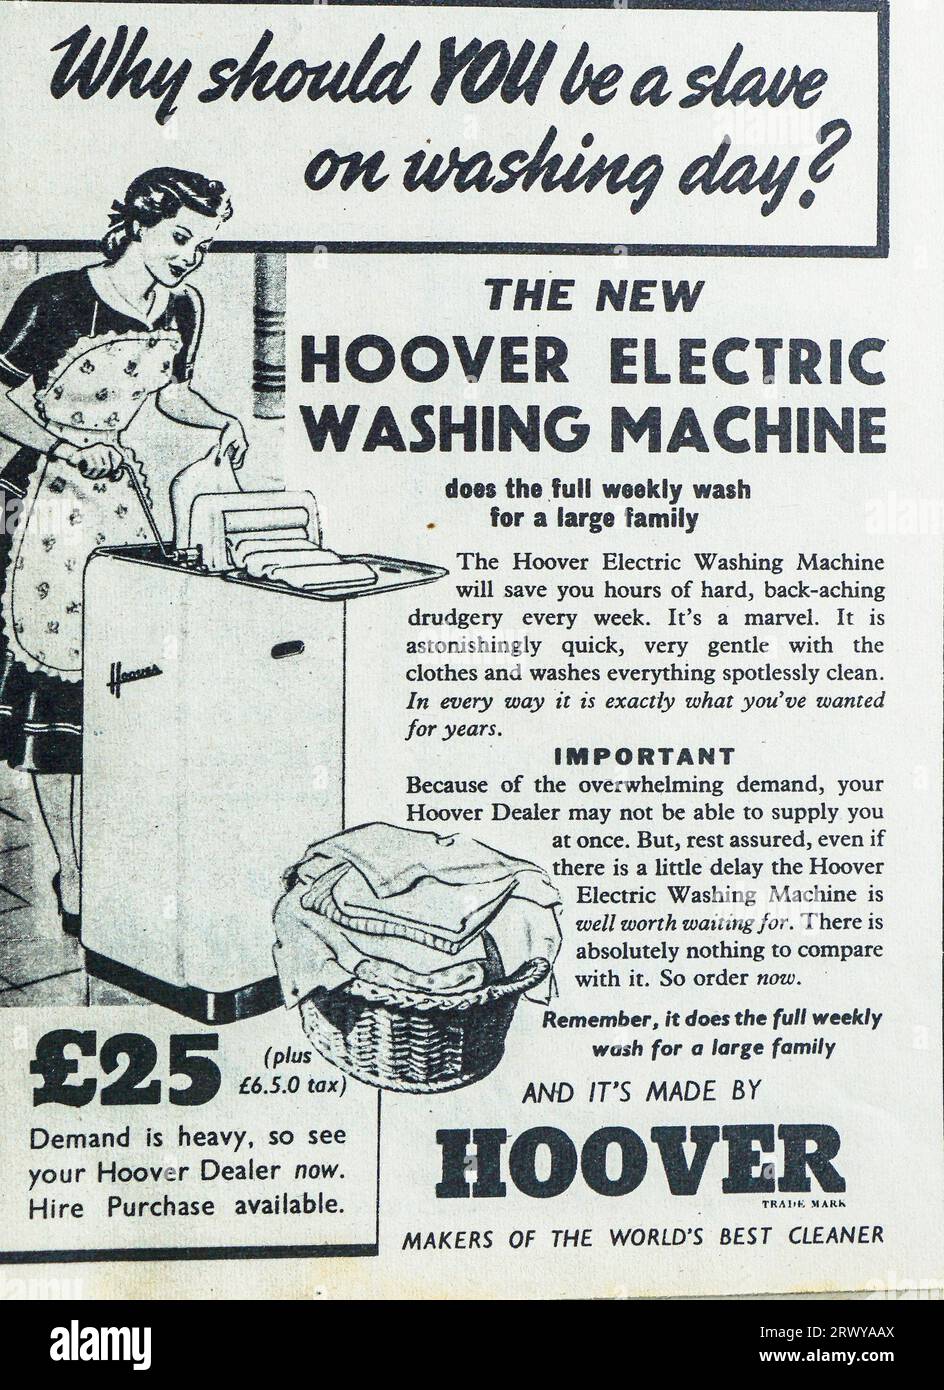 A 1950 advertisement for the new Hoover Electric Electric Washing Machine. Demand for the machine was said to be heavy and hire purchase was available. The machine ‘will save you hours of hard work, back aching drudgery every week’ and is ‘capable of washing the full weekly wash for a large family’. Stock Photo